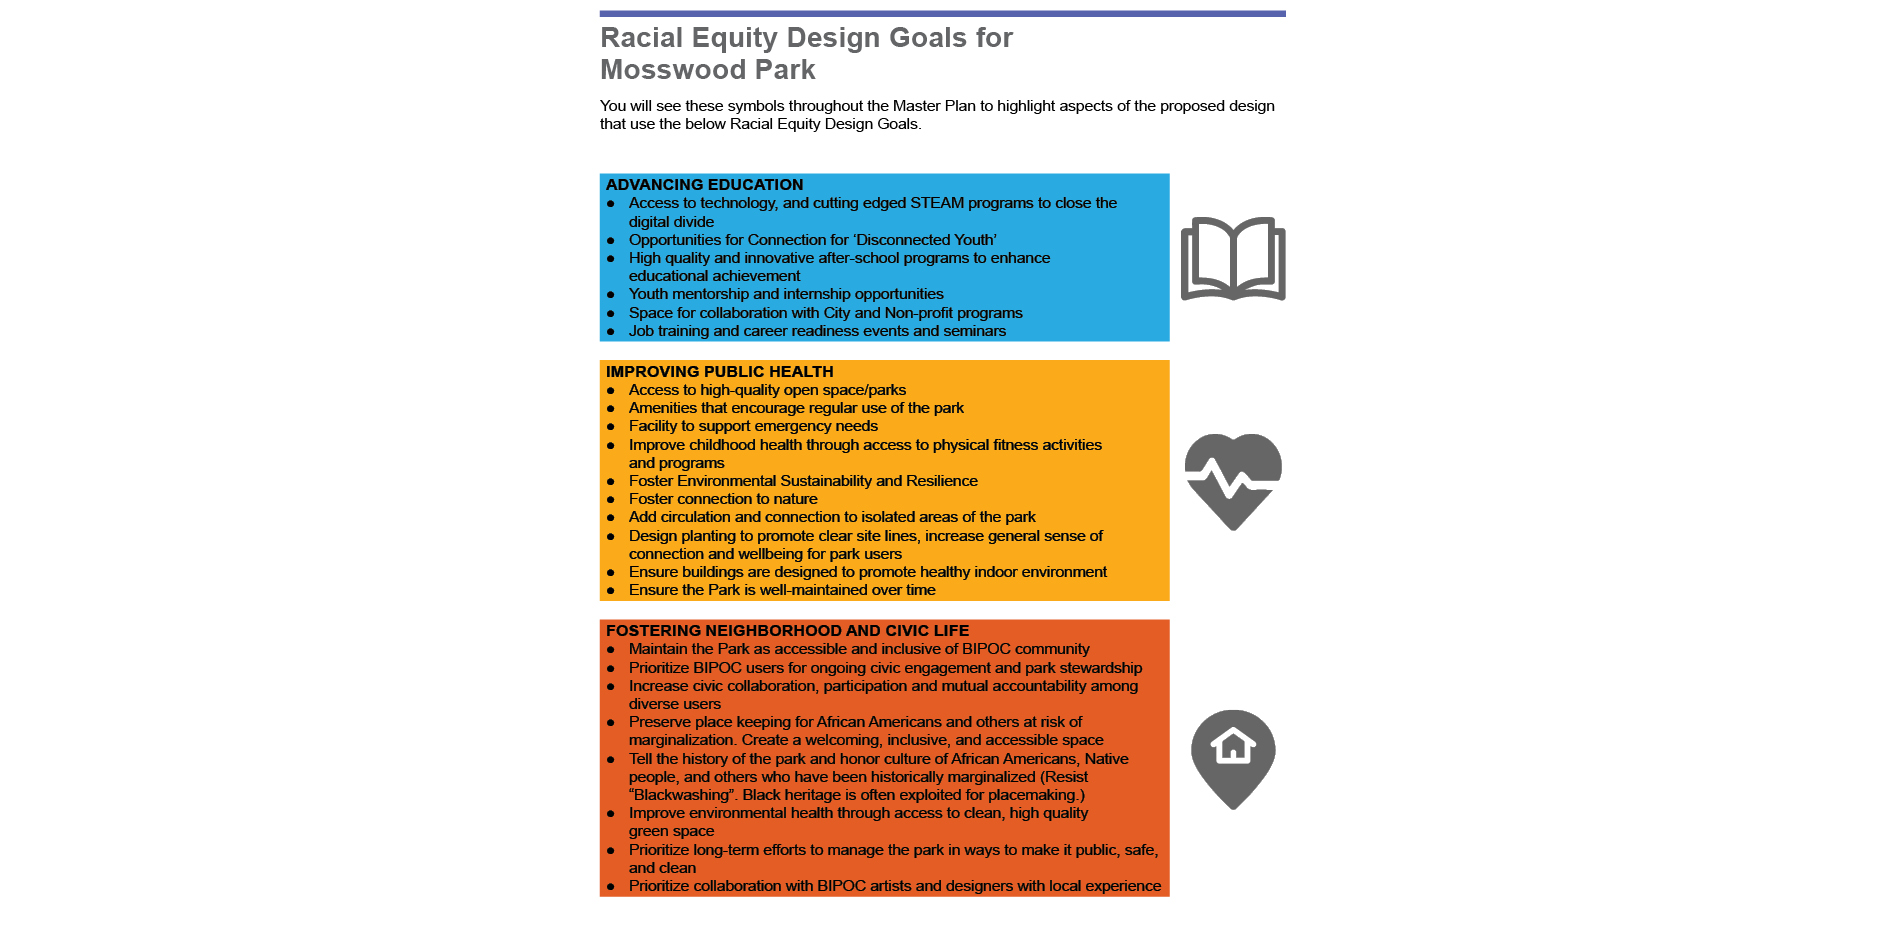 Race and Equity Guidelines